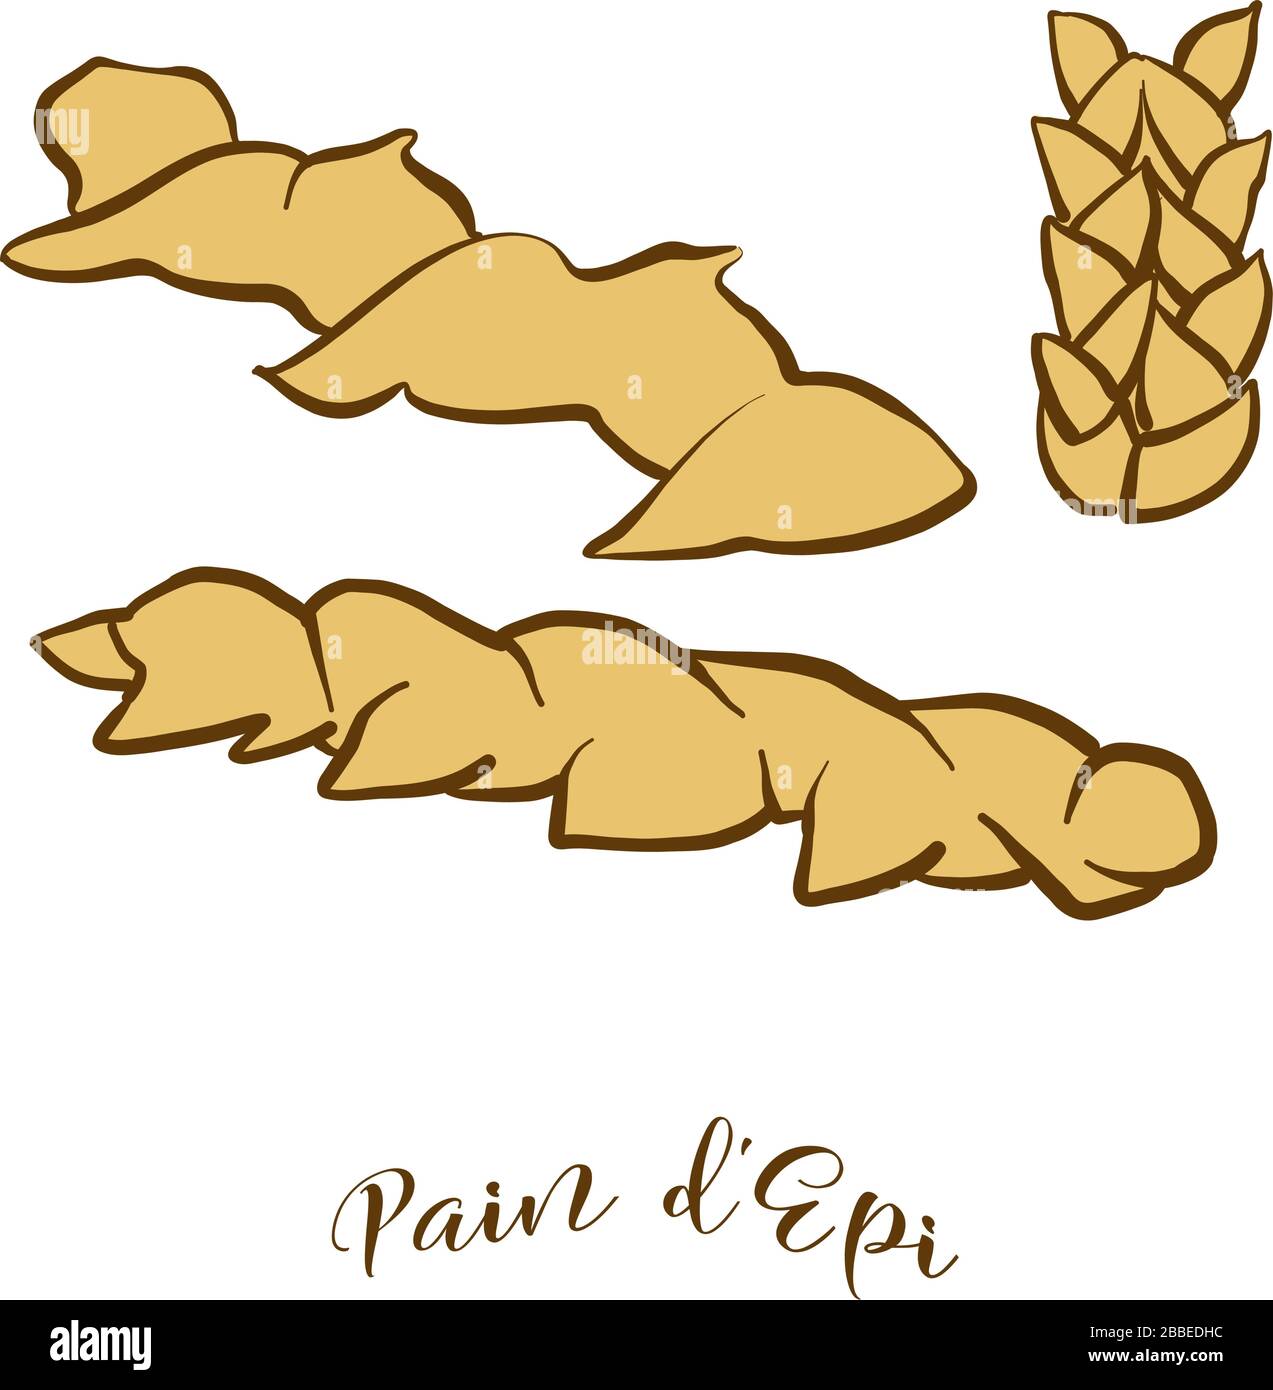 Colored drawing of Pain de Epi bread. Vector illustration of Yeast bread food, usually known in France. Colored Bread sketches. Stock Vector